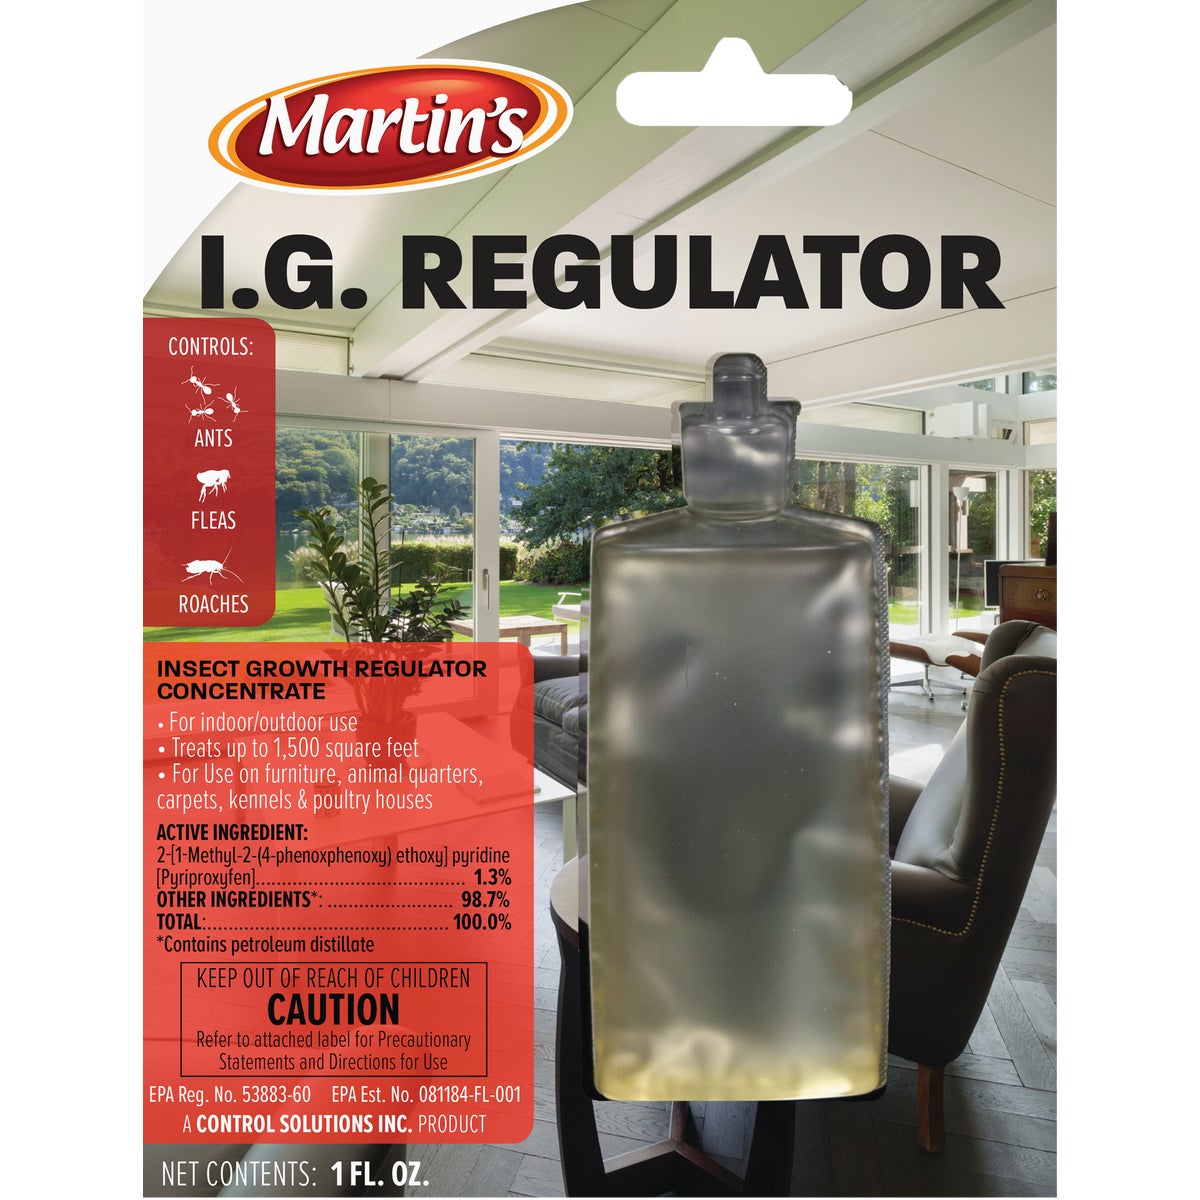 Item 703300, Insect growth regulator inhibits reinfestation of fleas for up to 7 months